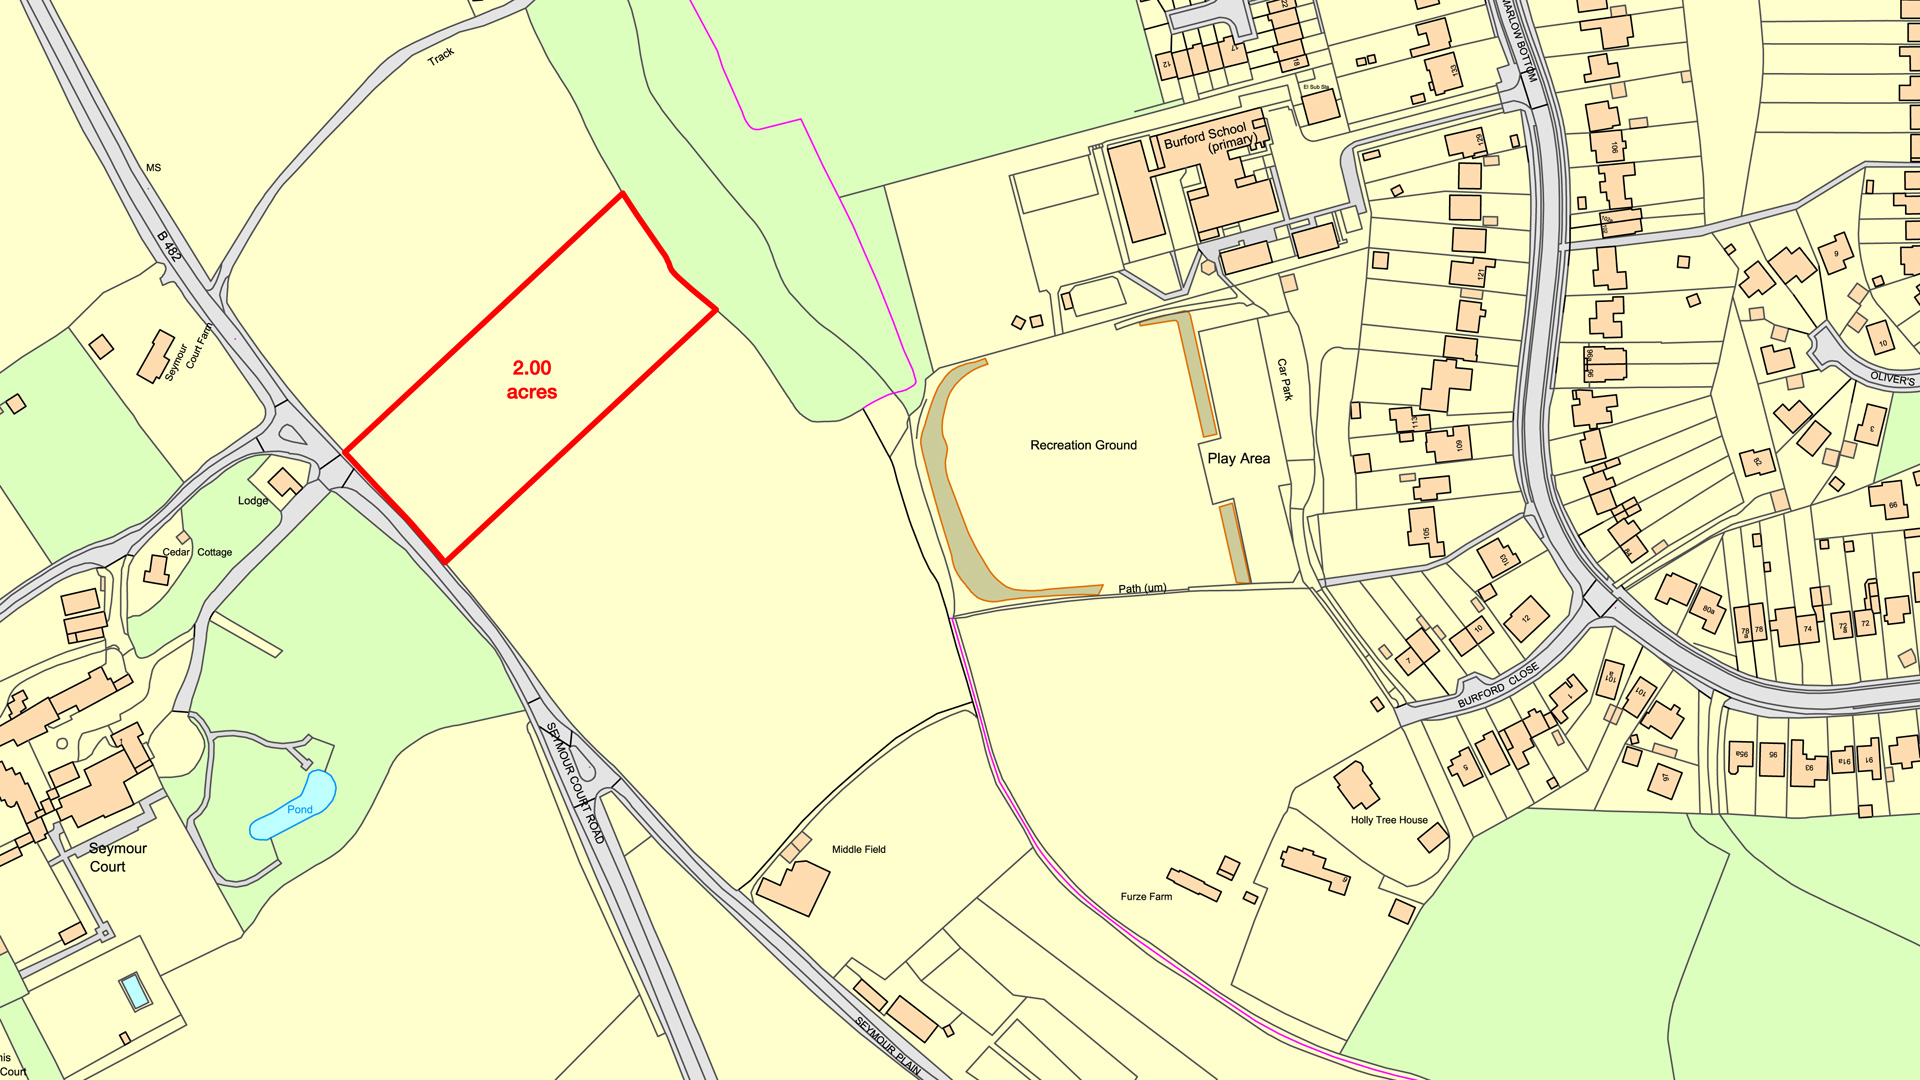 Land for sale in Marlow site plan